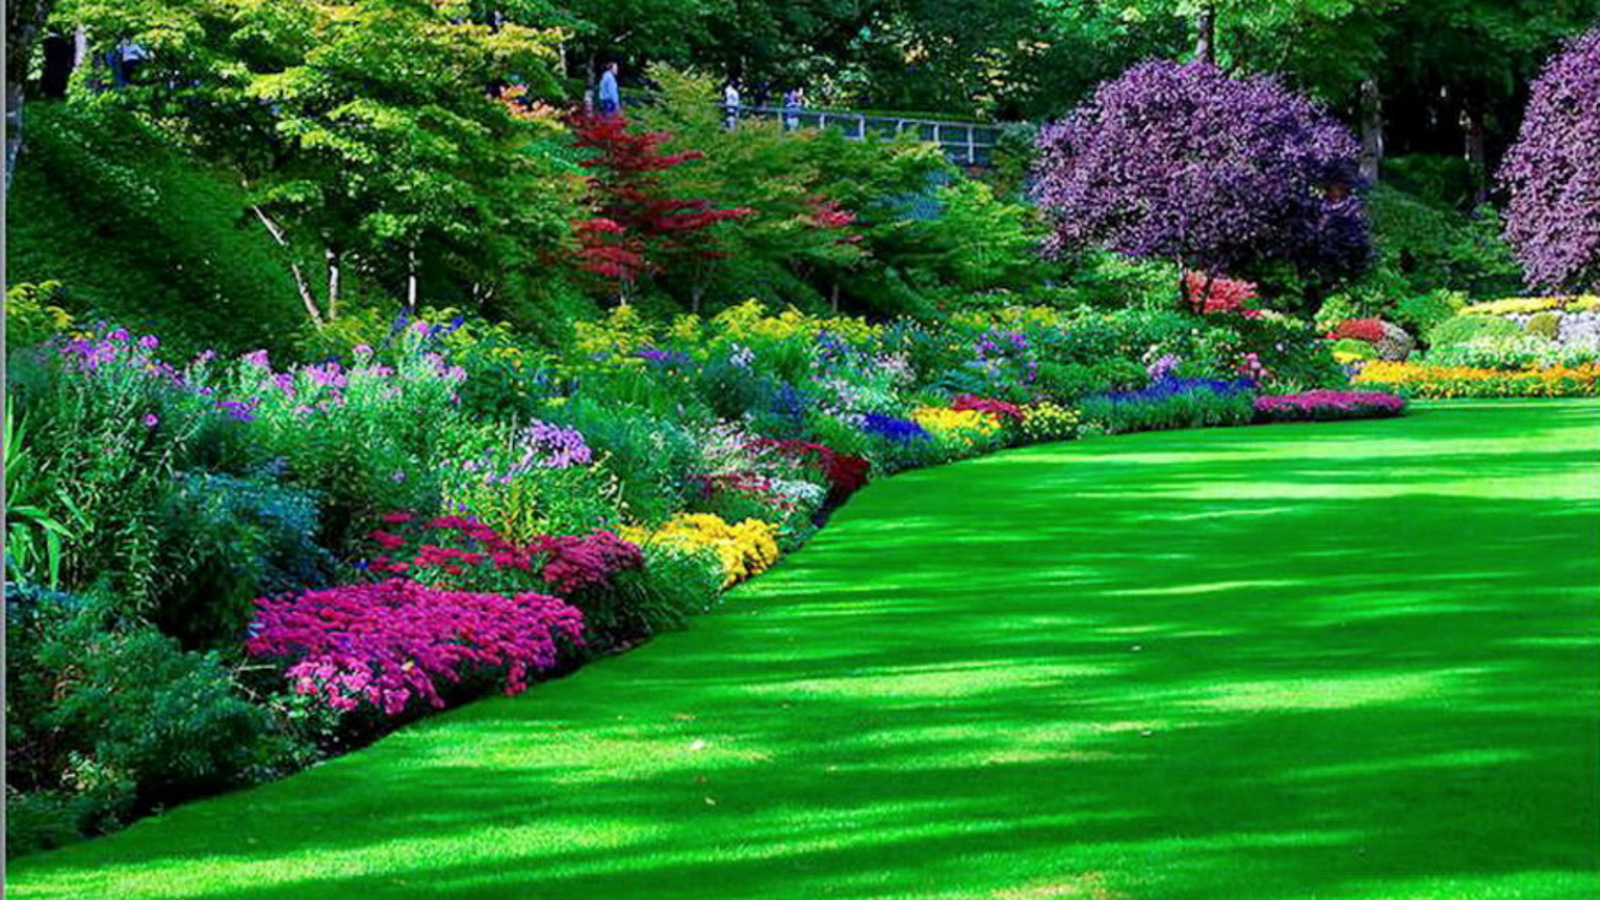 Garden Image HD Photos Live Wallpaper Hq Pictures